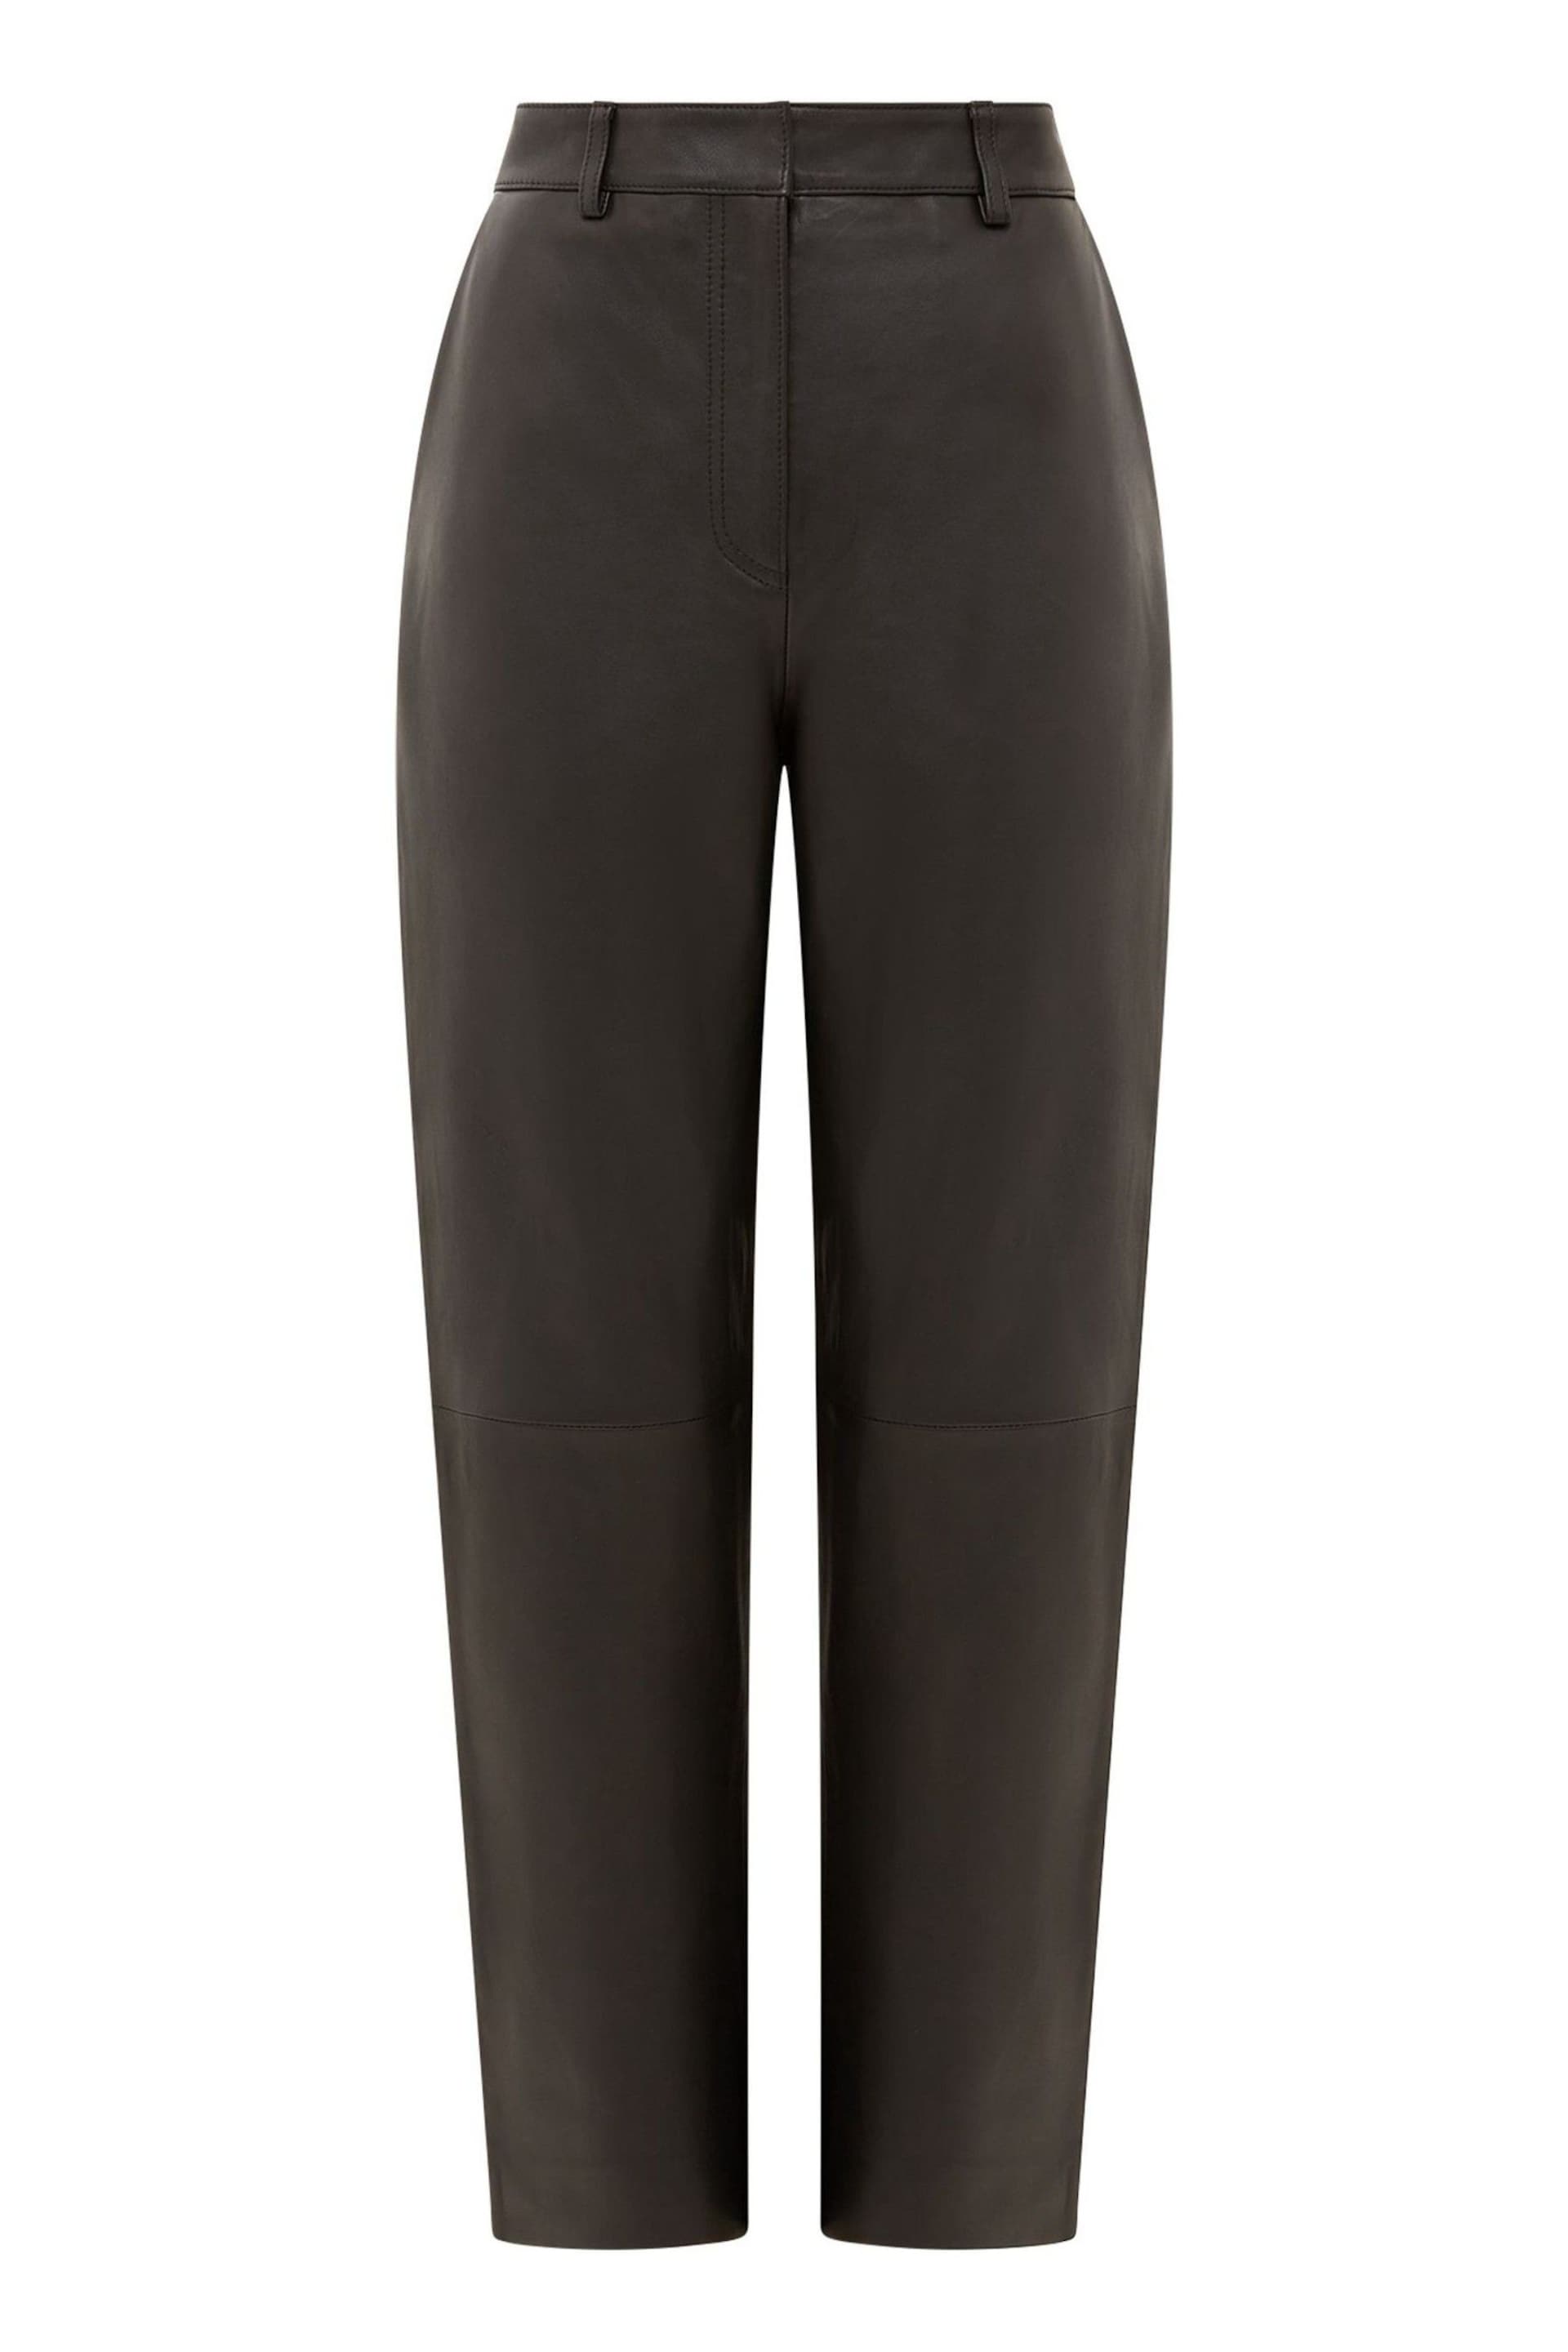 French Connection Connie Leather Trousers - Image 4 of 4